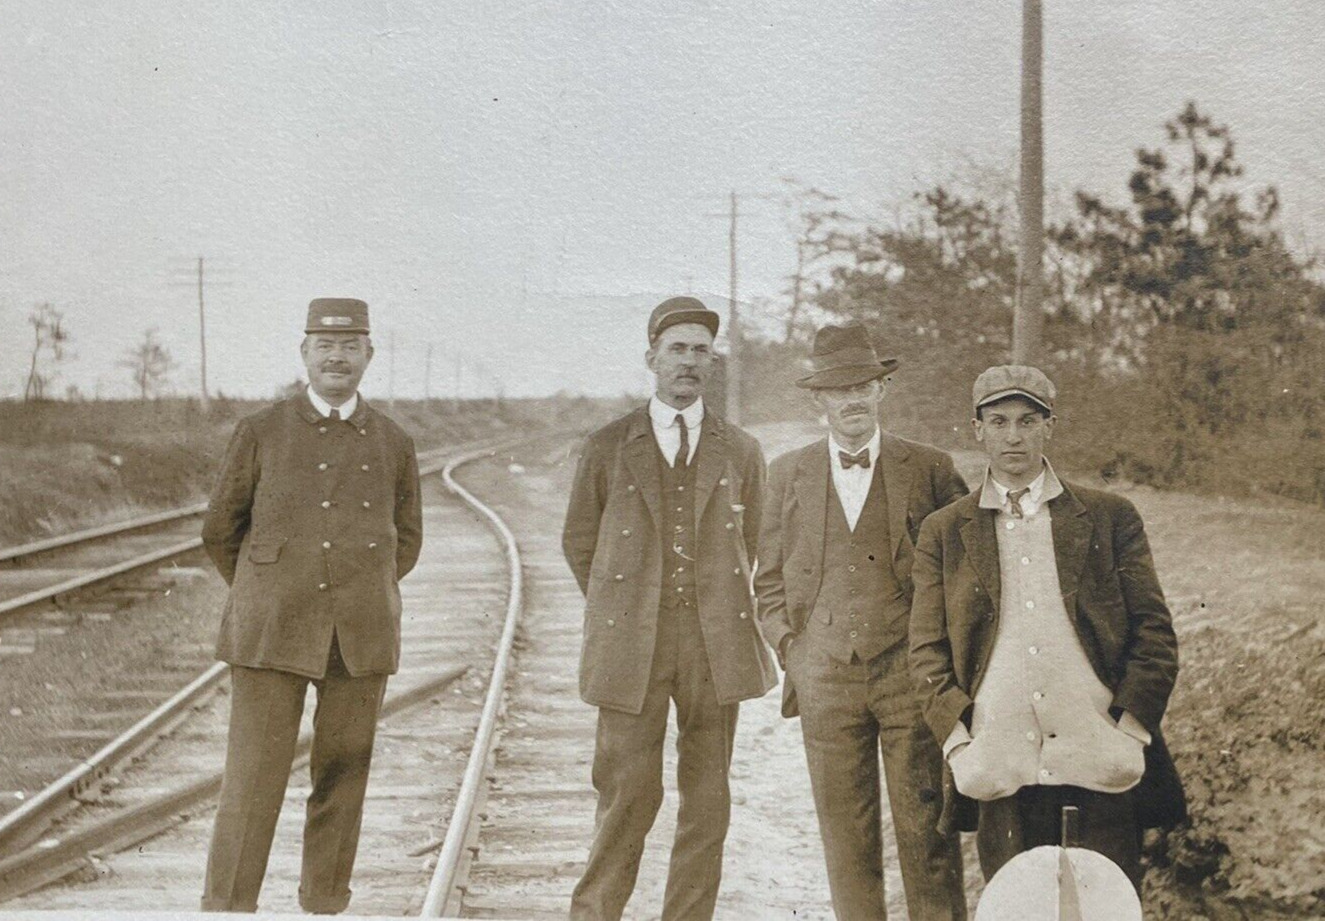 Railroad Train Conductors Vintage Photo Group of Men on Tracks Early 1900s